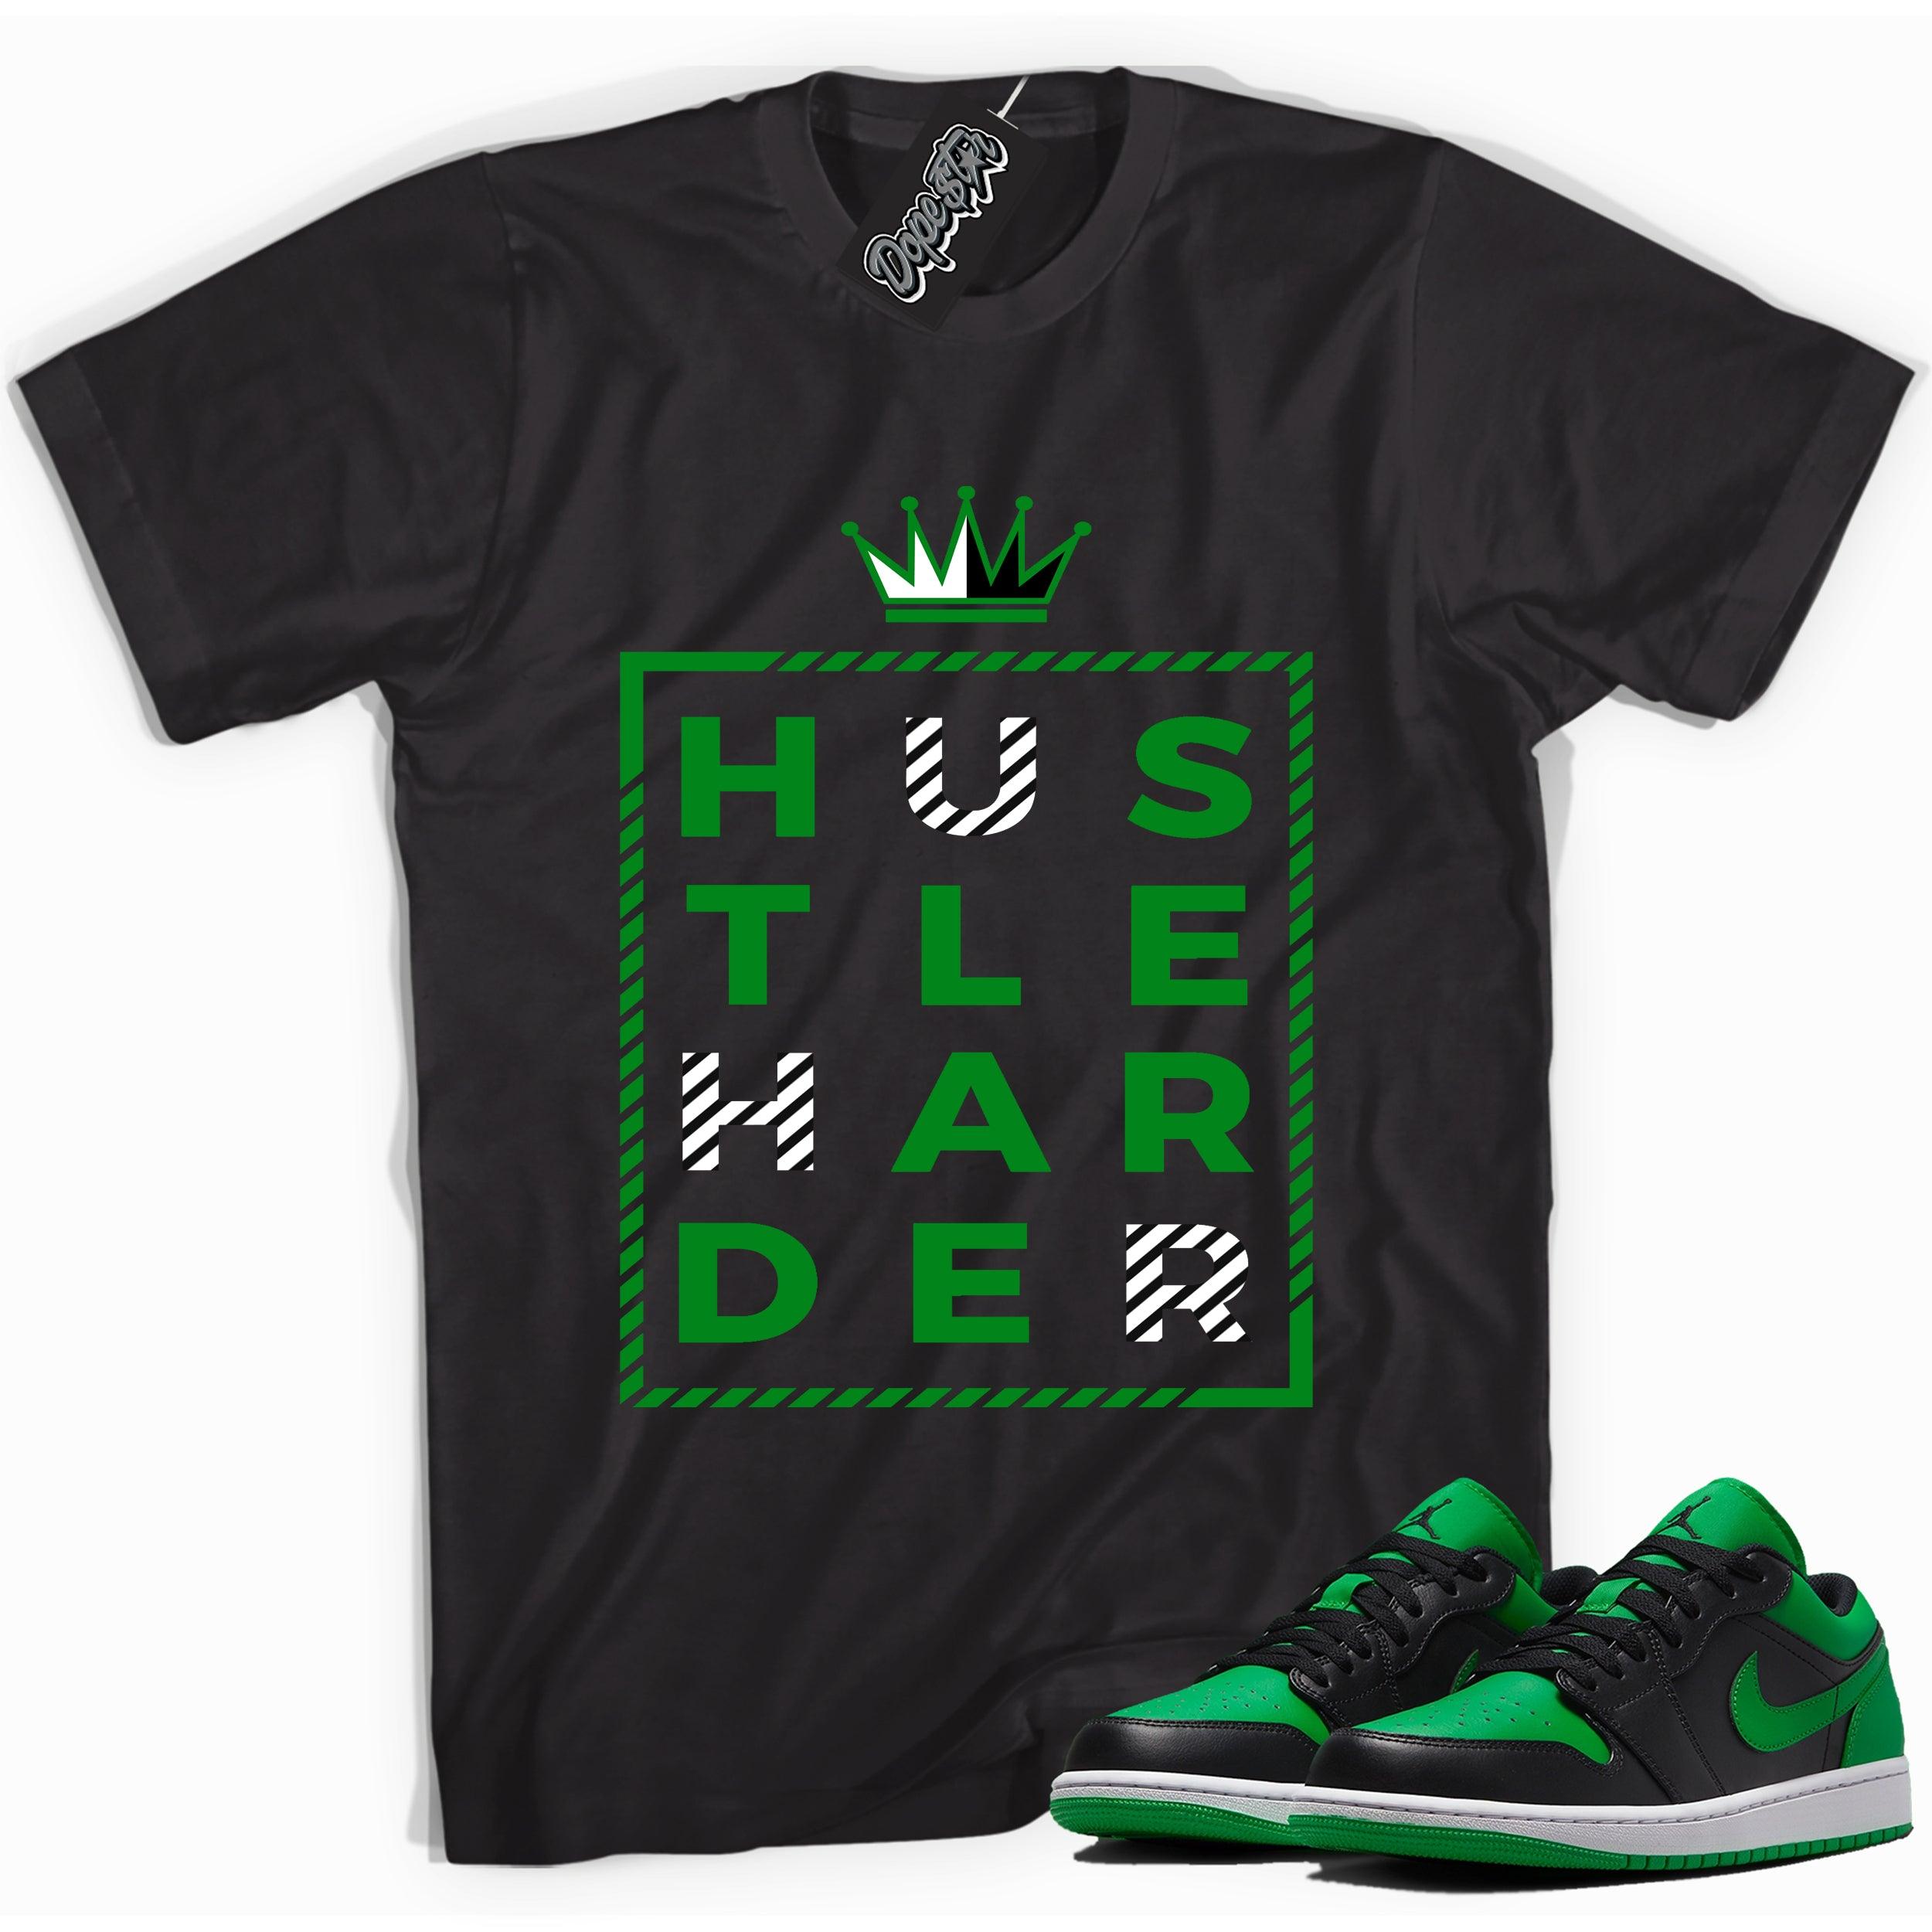 Cool black graphic tee with 'Hustle Harder' print, that perfectly matches Air Jordan 1 Low Lucky Green sneakers